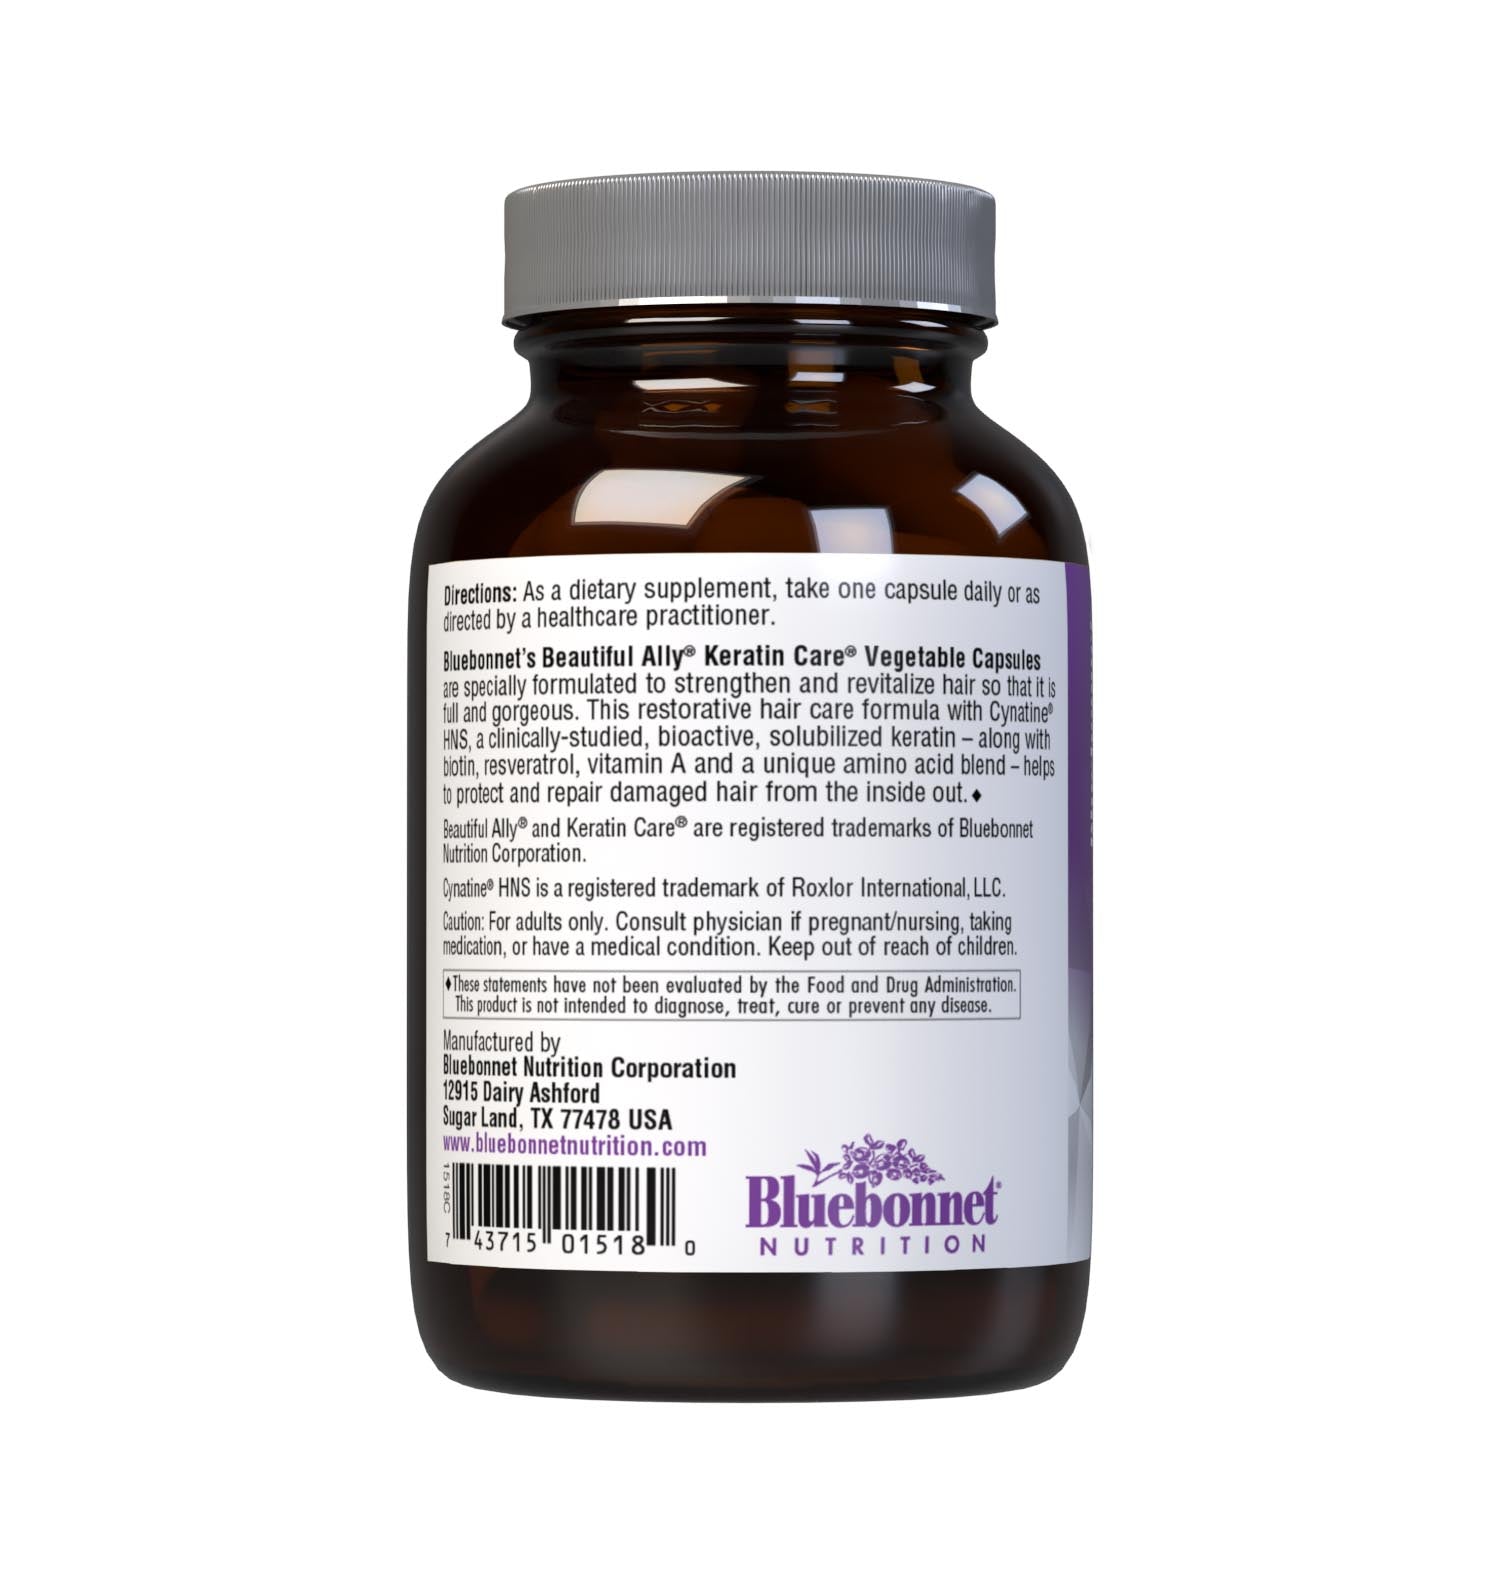 Bluebonnet’s Beautiful Ally Keratin Care 30 Vegetable Capsules are specially formulated with Cynatine HNS, a clinically-studied, bioactive, solubilized keratin – along with biotin, resveratrol, vitamin A and a unique amino acid blend – to help promote the appearance of strong, gorgeous hair. This restorative hair care formula helps protect and repair damaged hair from the inside out. Description panel. #size_30 count